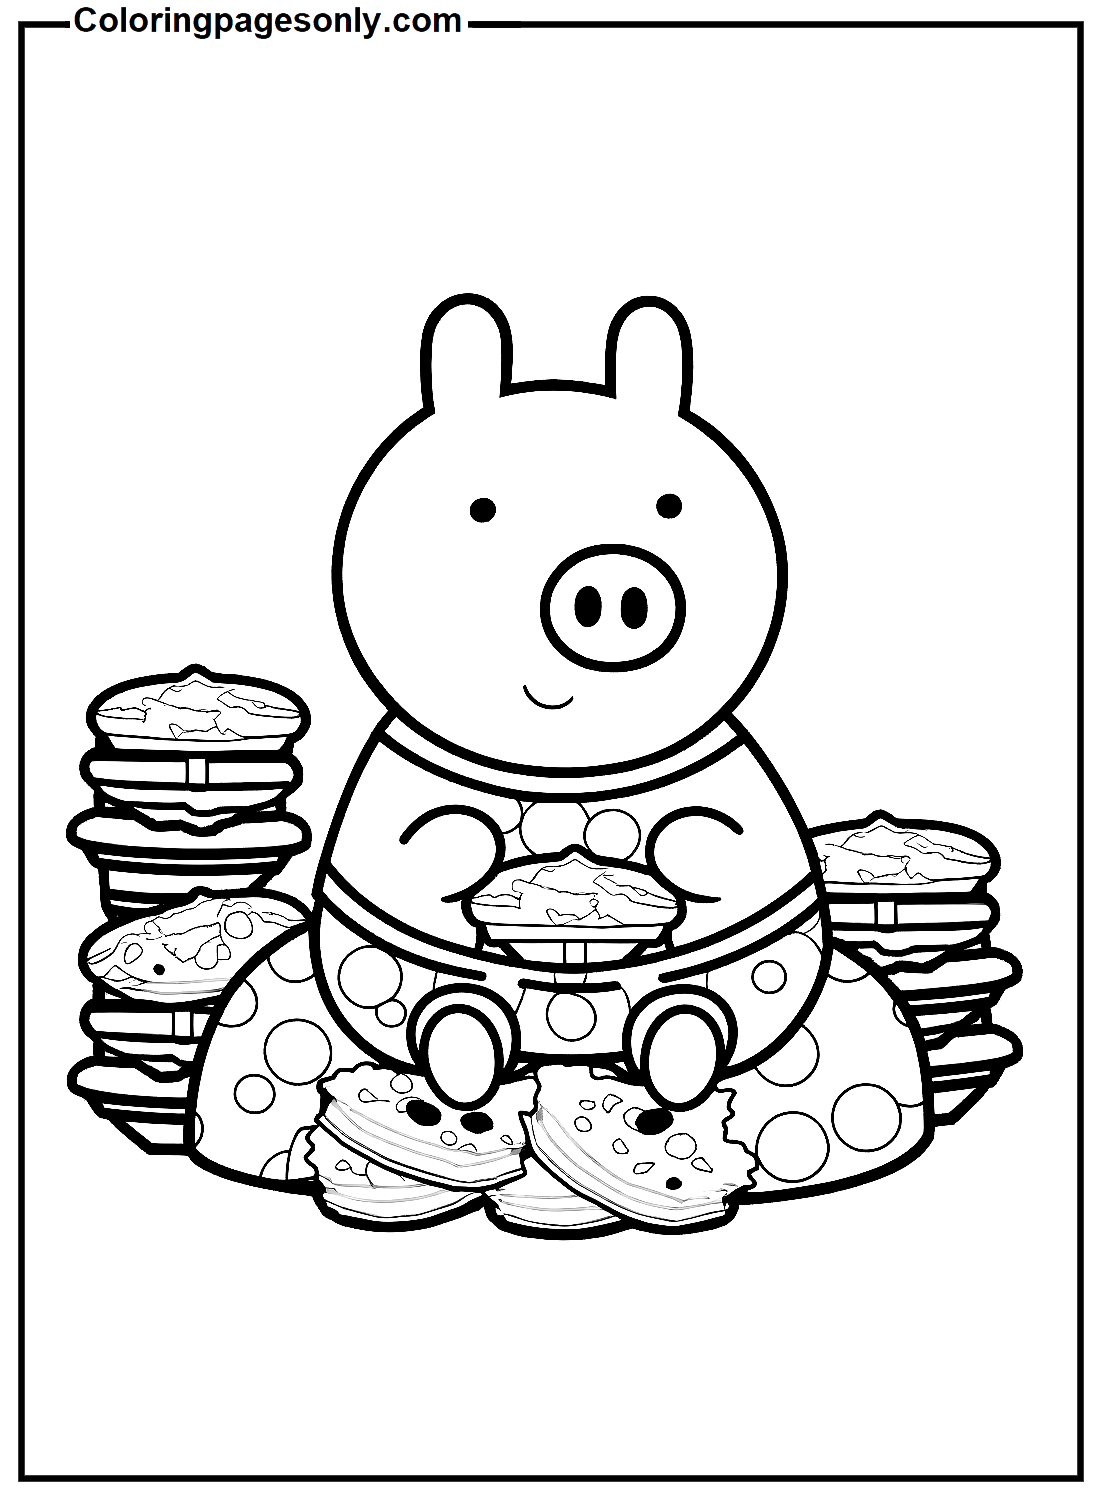 Pig with Cookies from Cookie